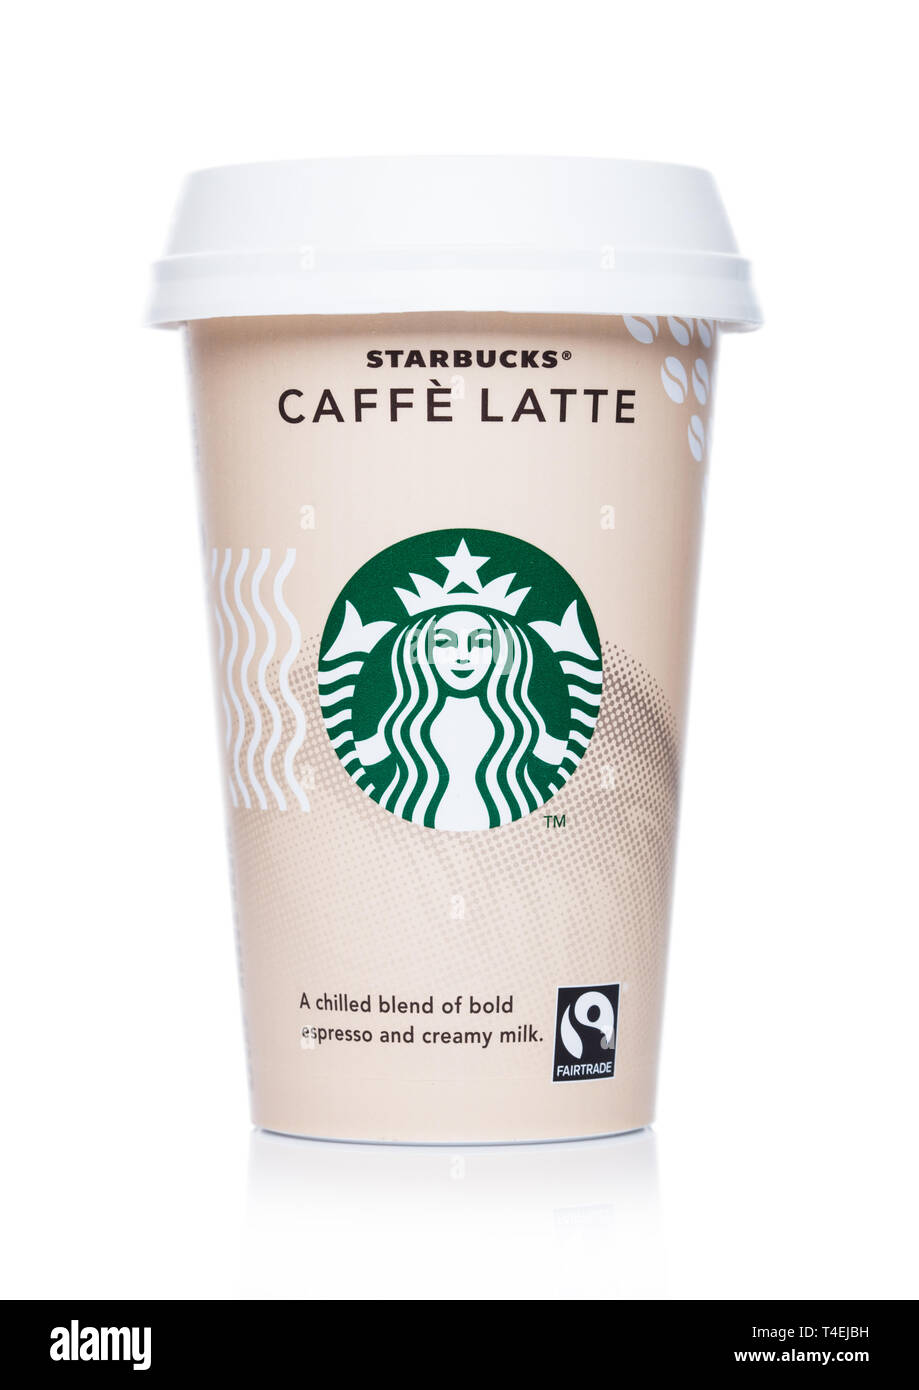 https://c8.alamy.com/comp/T4EJBH/london-uk-april-15-2019-paper-cup-of-starbucks-cold-coffee-caffe-latte-on-white-T4EJBH.jpg